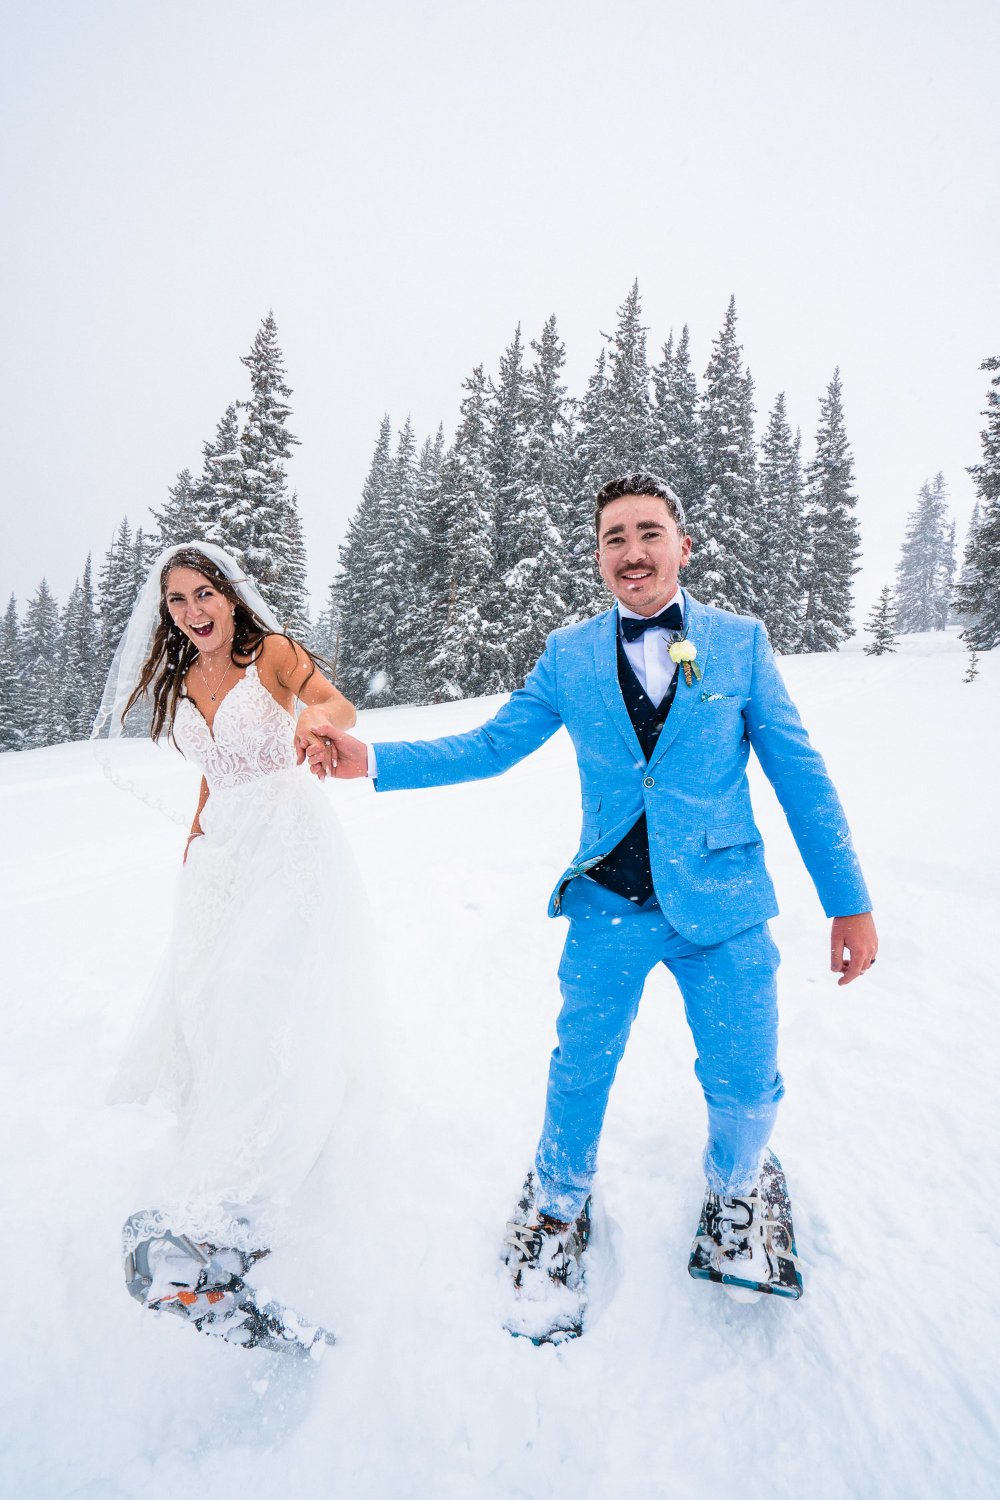 A bride and groom standing on snowshoes in the snow, capturing memorable elopement photos.